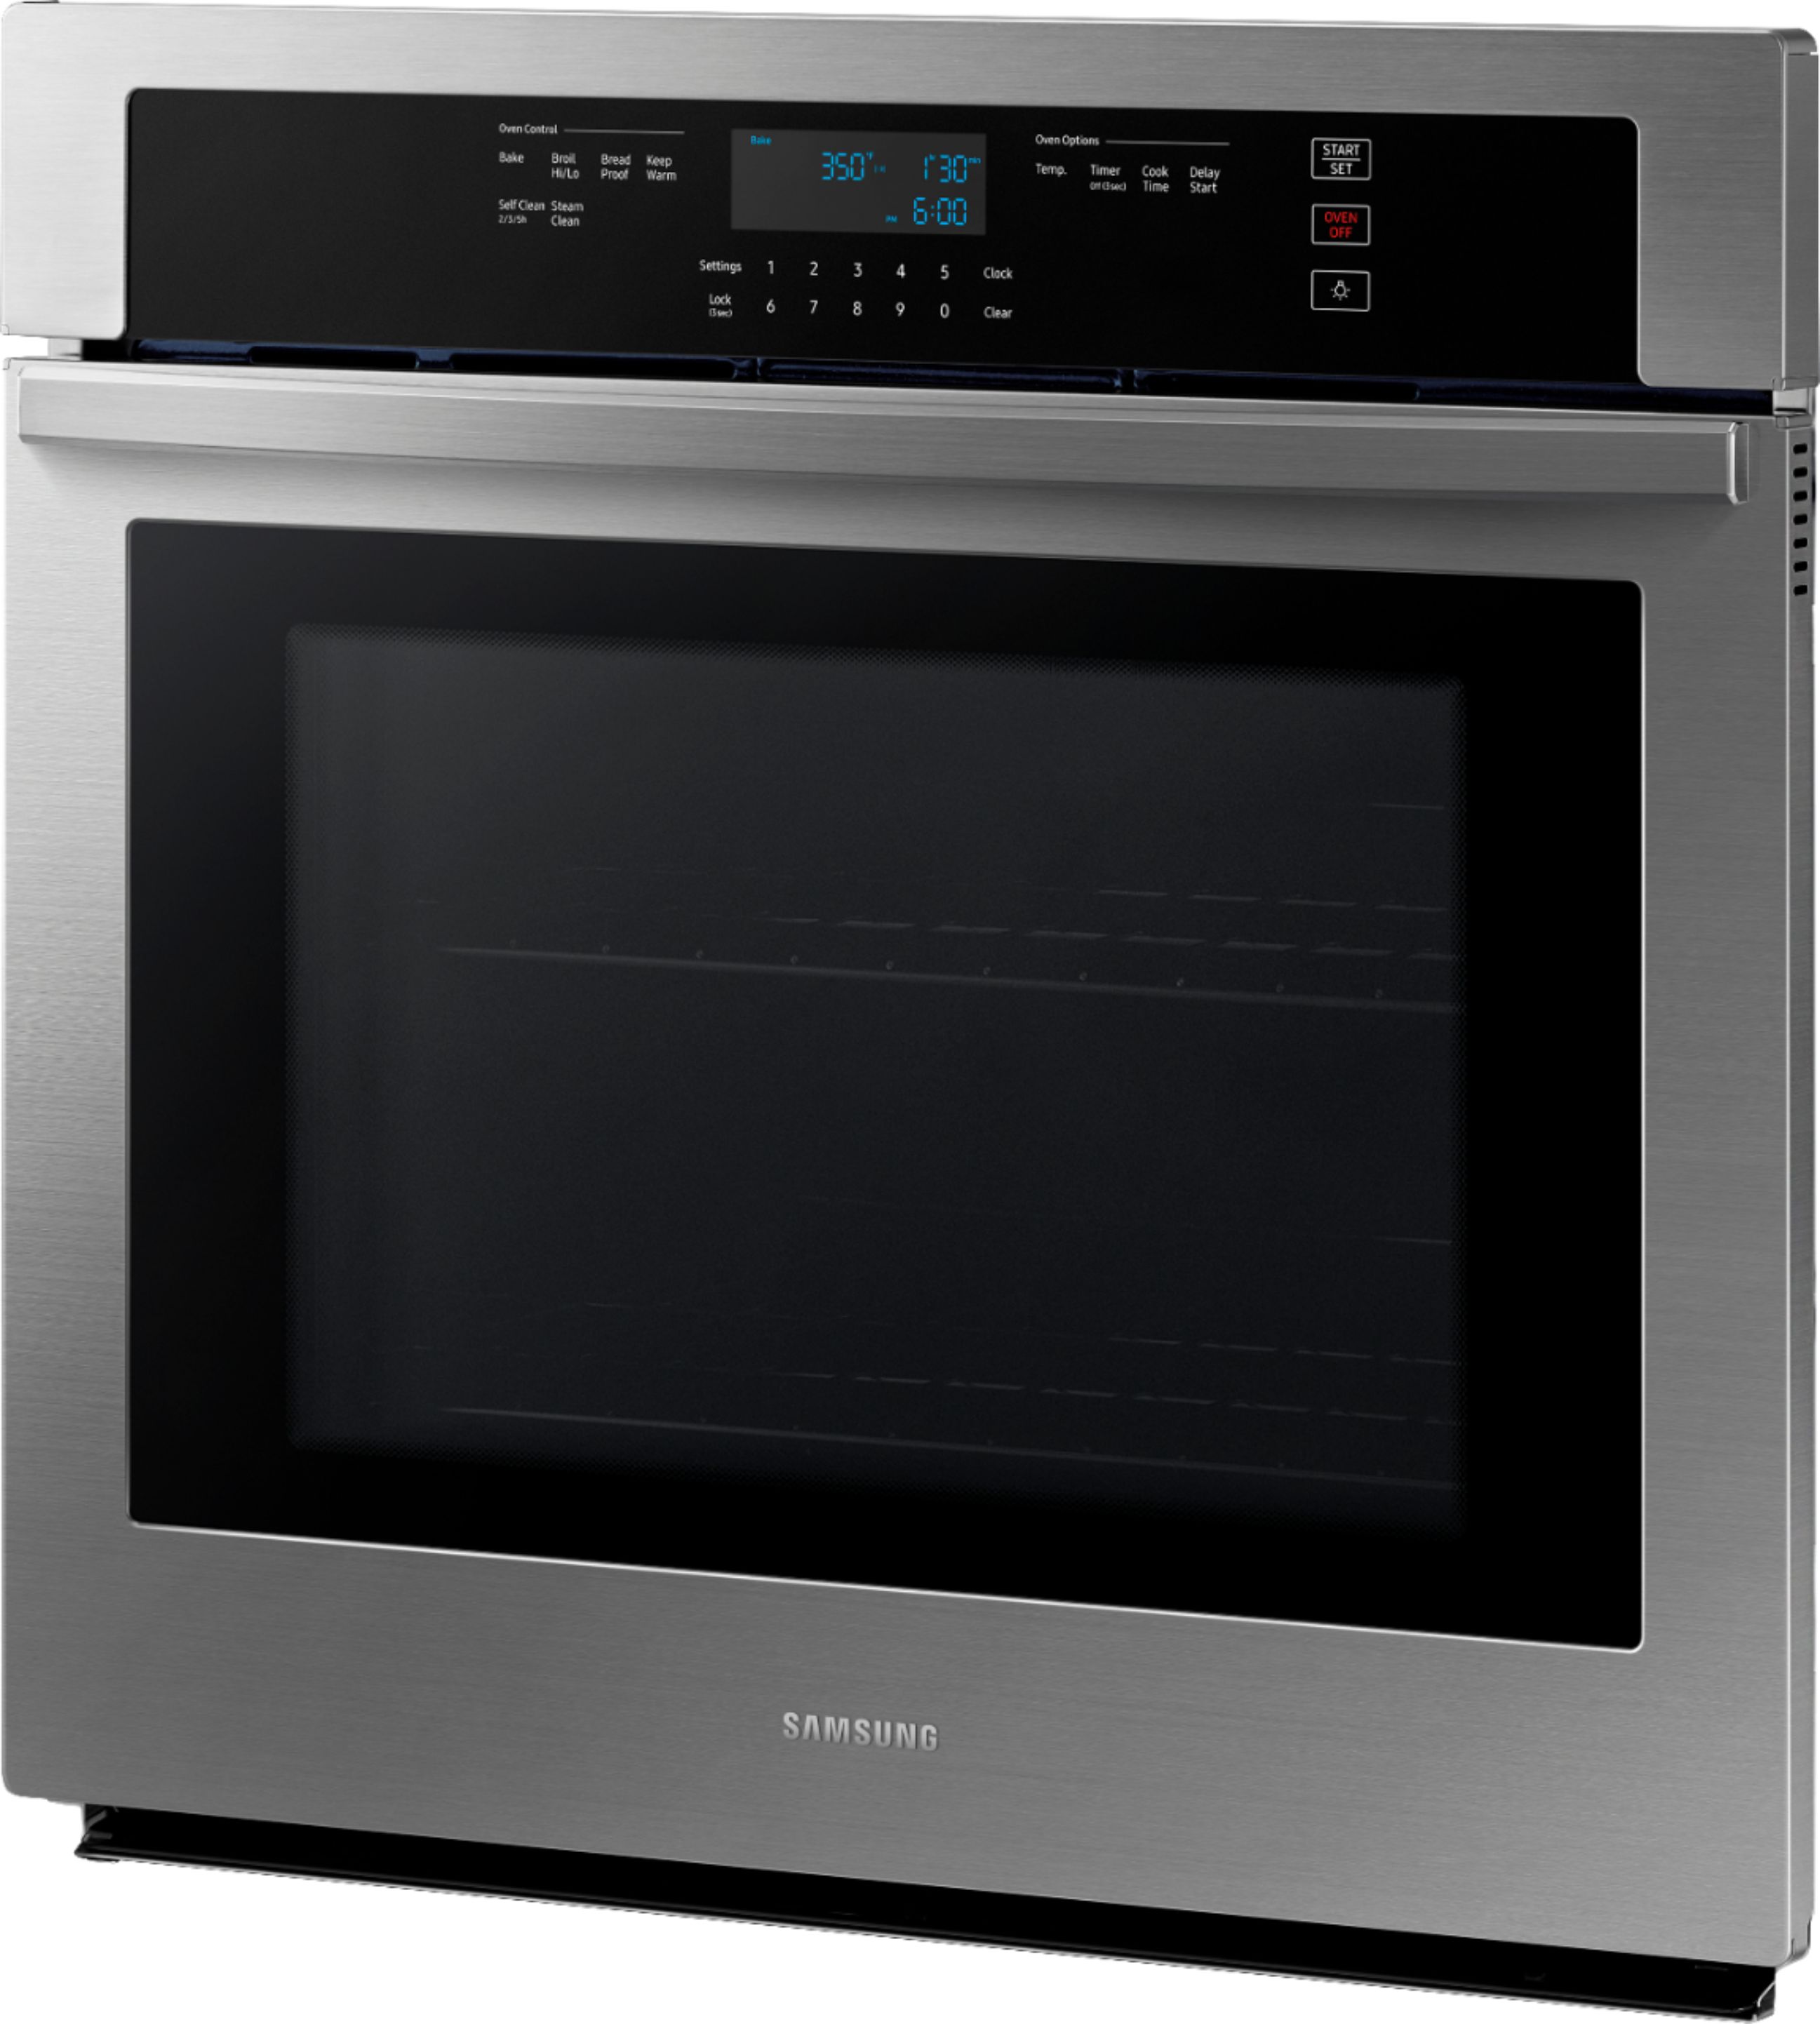 Samsung 30" Built-In Single Electric Wall Oven Black stainless steel Black Stainless Steel Single Wall Oven